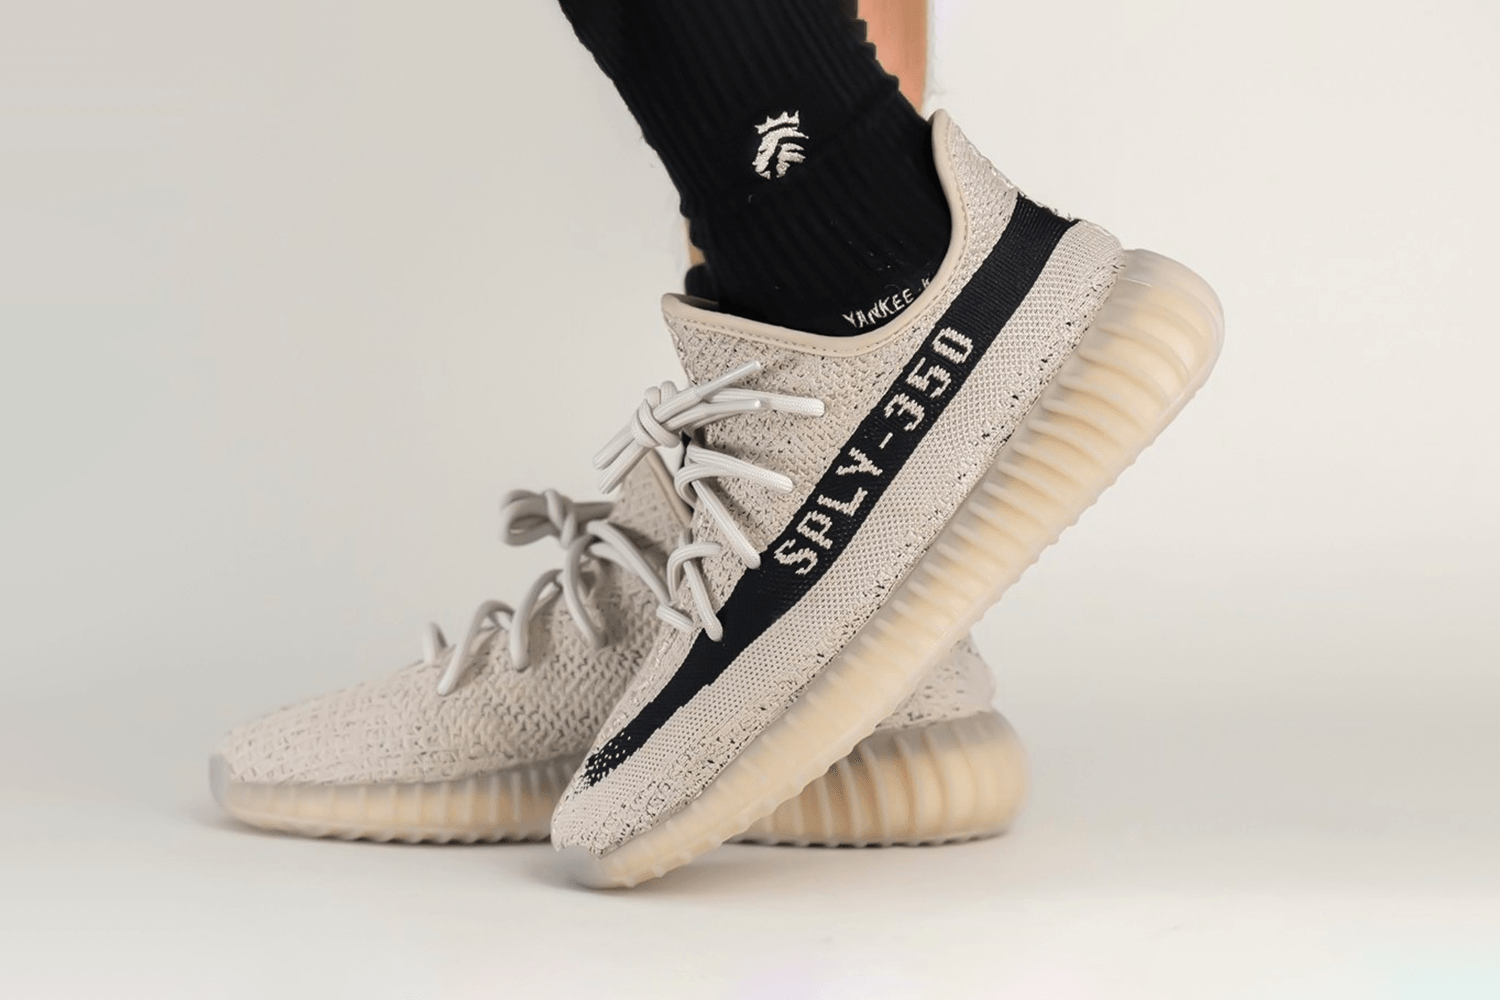 The adidas Yeezy Boost 350 V2 'Reverse Oreo' release is just around the corner